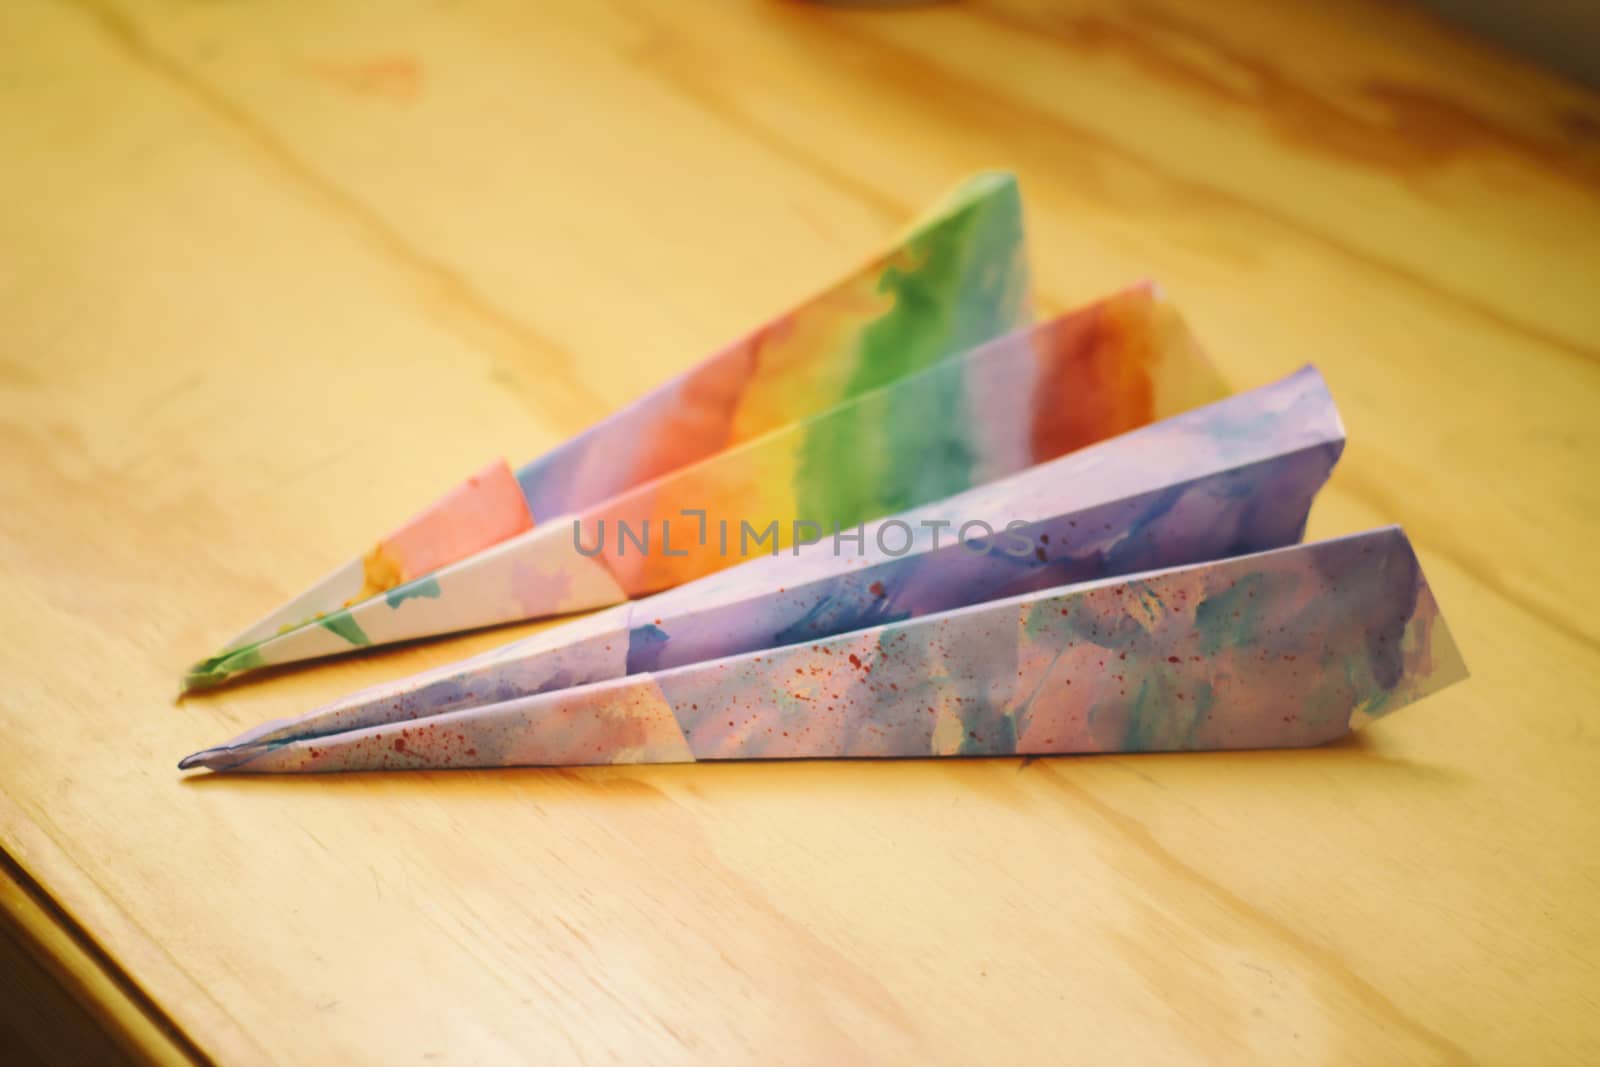 Photograph of some paper colorful planes on a wood table